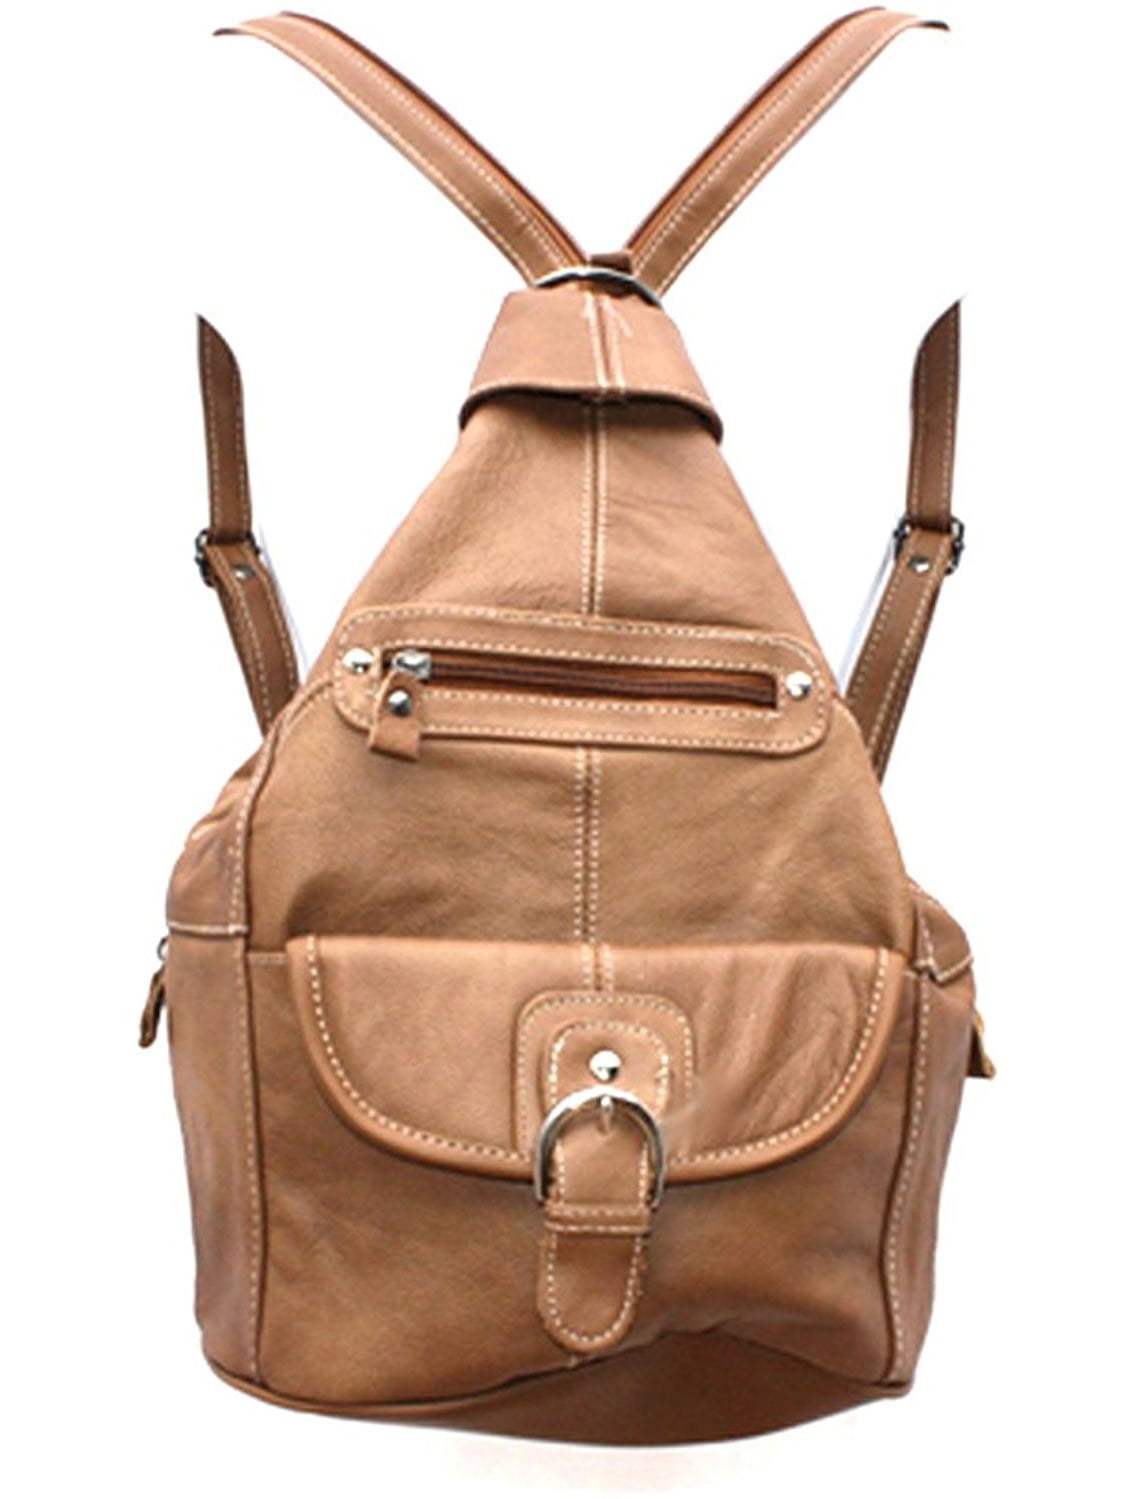 Roma leather - Womens Leather Convertible 7 Pocket Medium Size Tear Drop Sling Backpack Purse ...